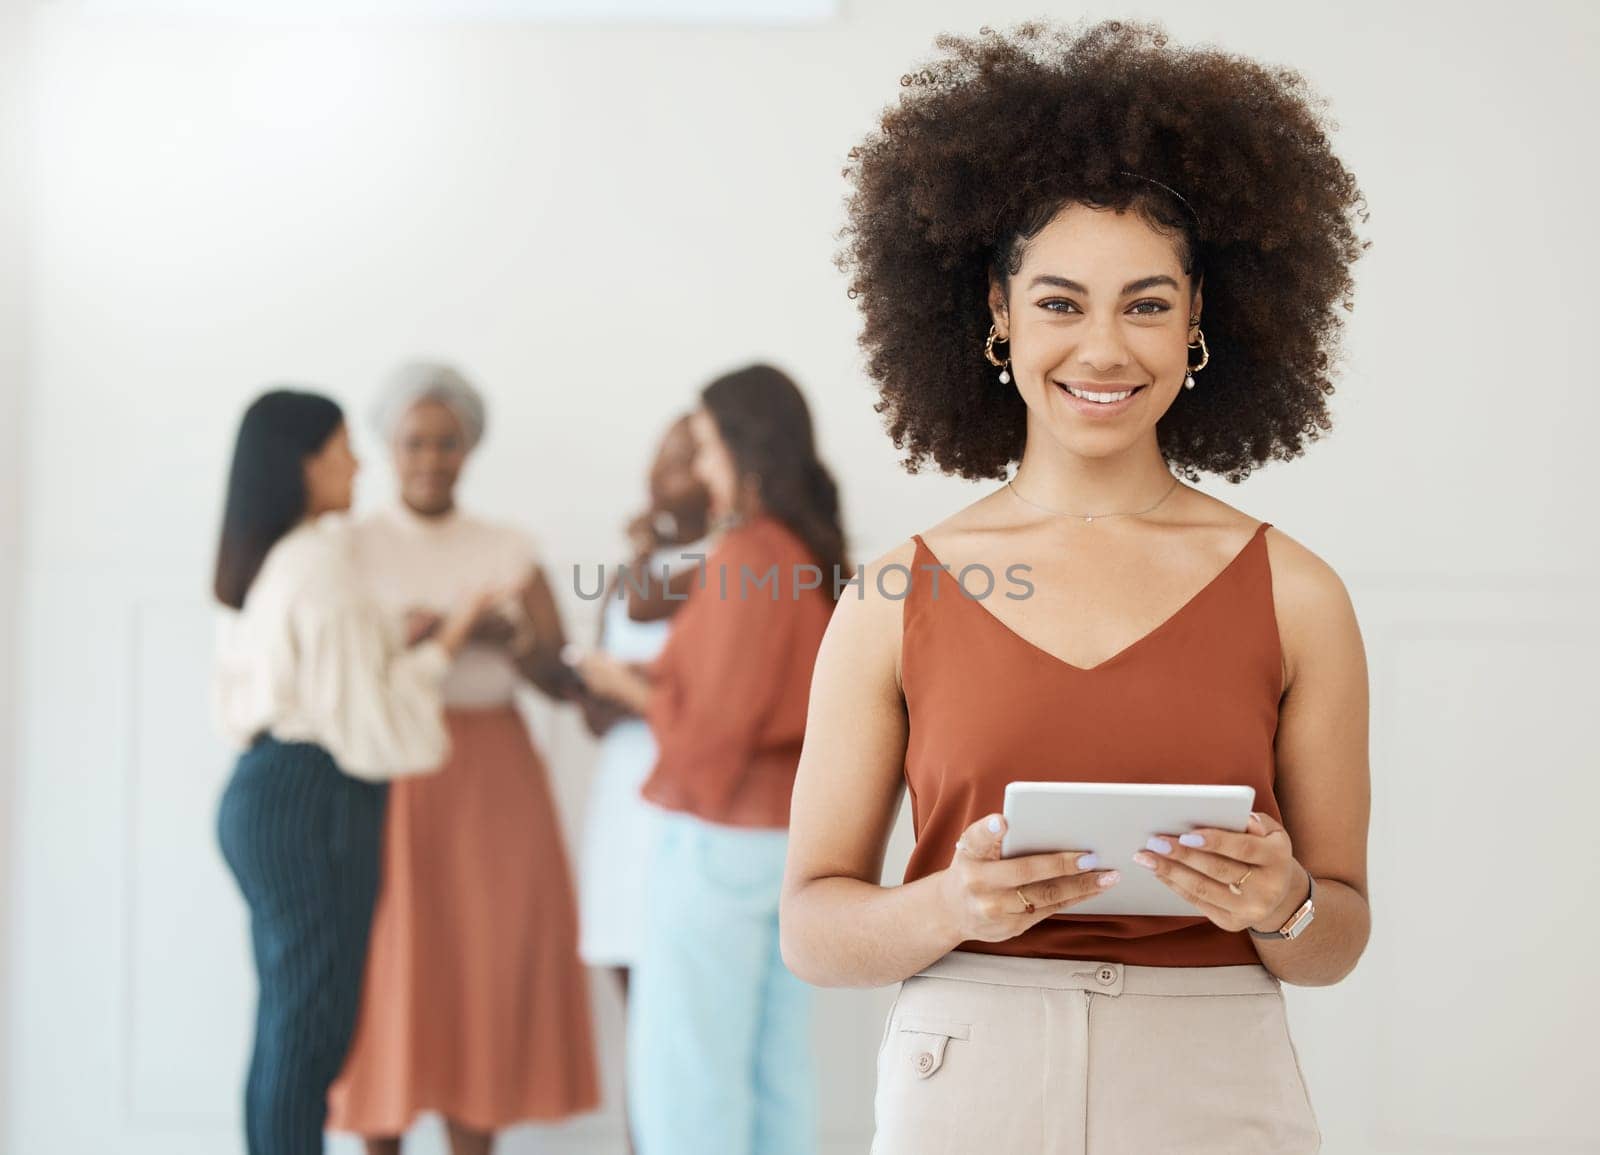 Tablet, portrait and business woman with a smile for communication, internet and network connection. Black female leader working on mobile touch screen for social media, leadership report or search.